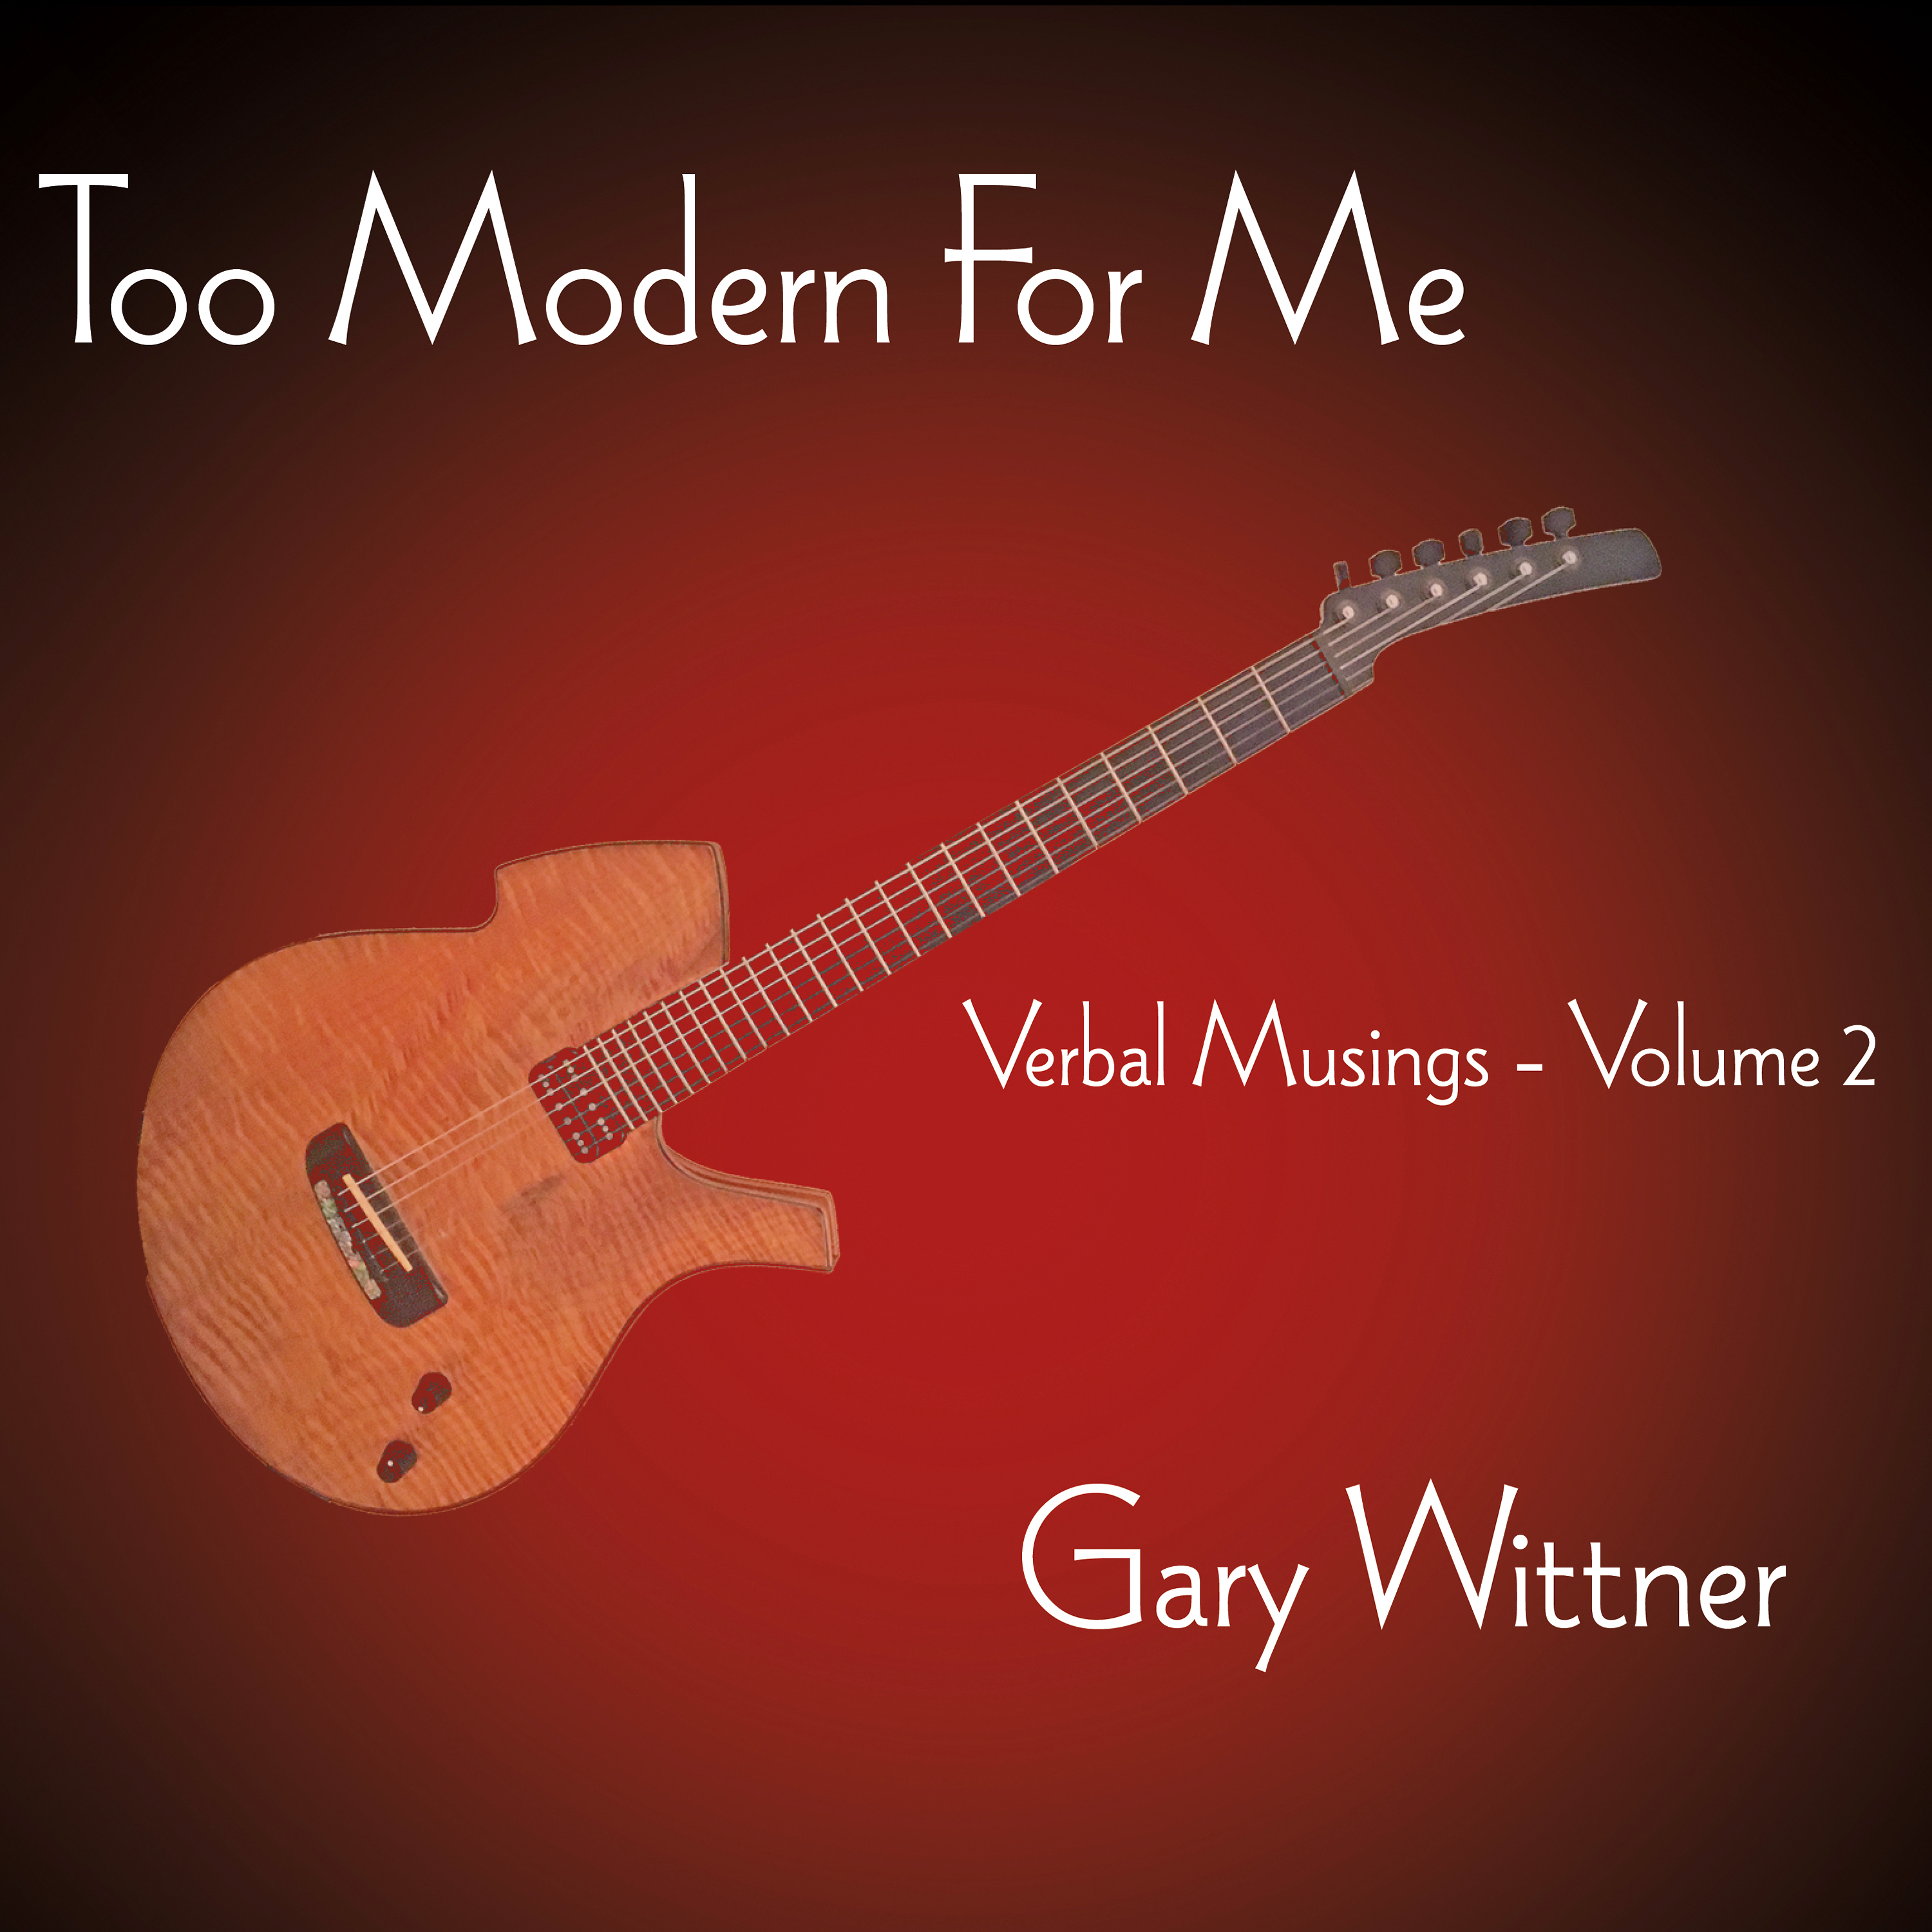 Too Modern for Me cd cover